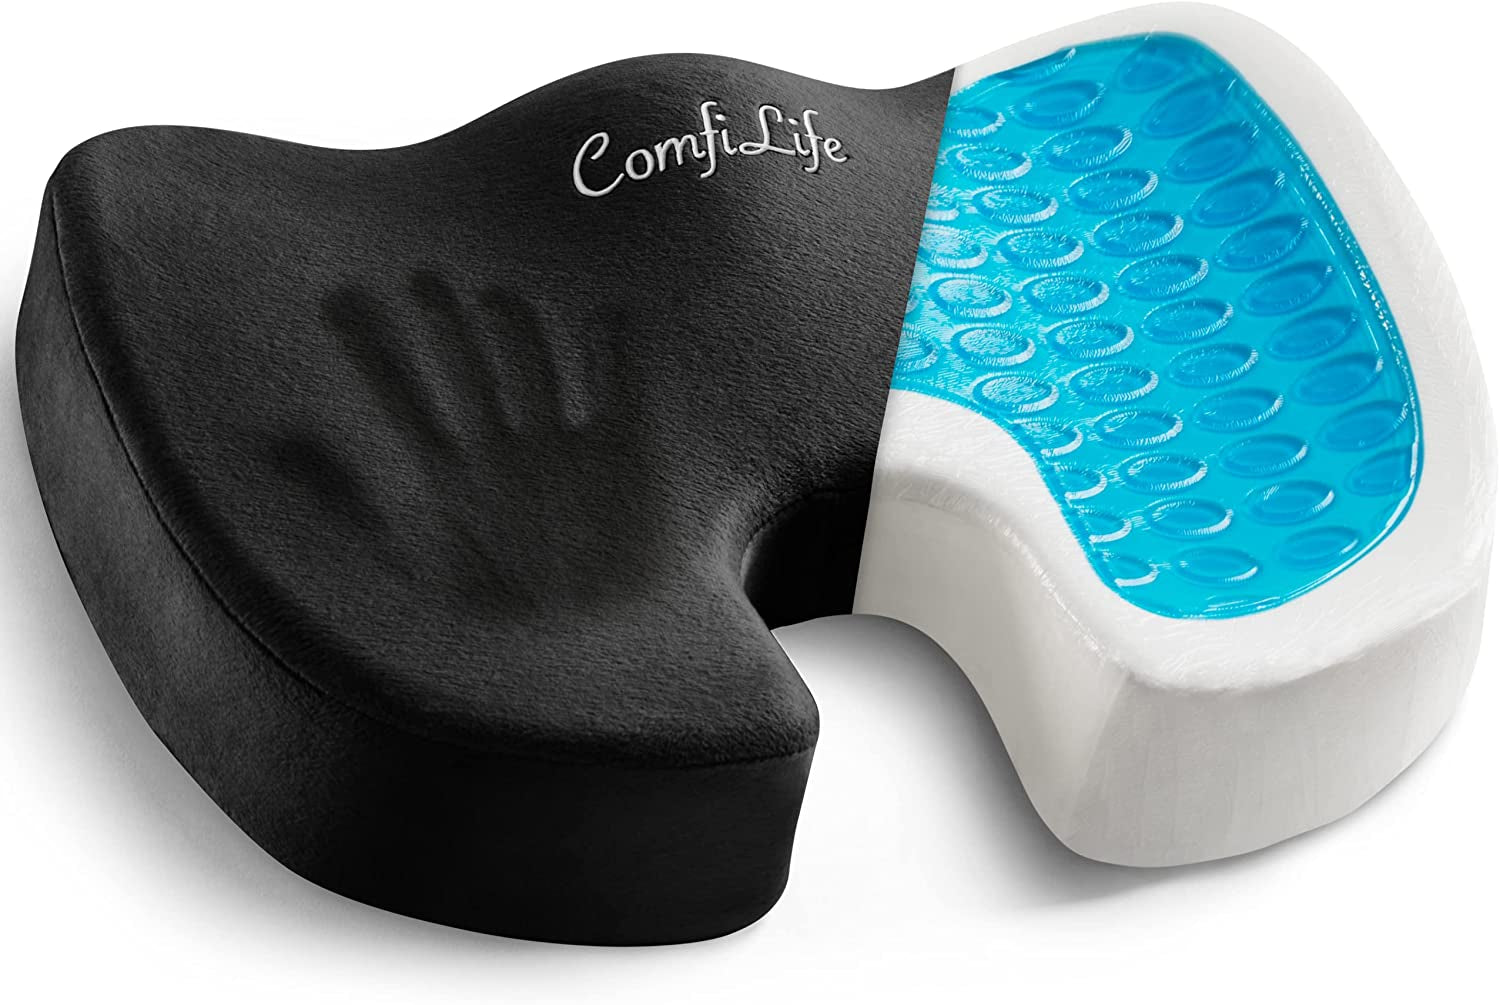 Professional Title: "Comfilife Gel Enhanced Seat Cushion for Office Chair - Non-Slip Memory Foam Coccyx Cushion for Tailbone Pain Relief - Suitable for Desk Chair, Car Seat, Driving - Black"